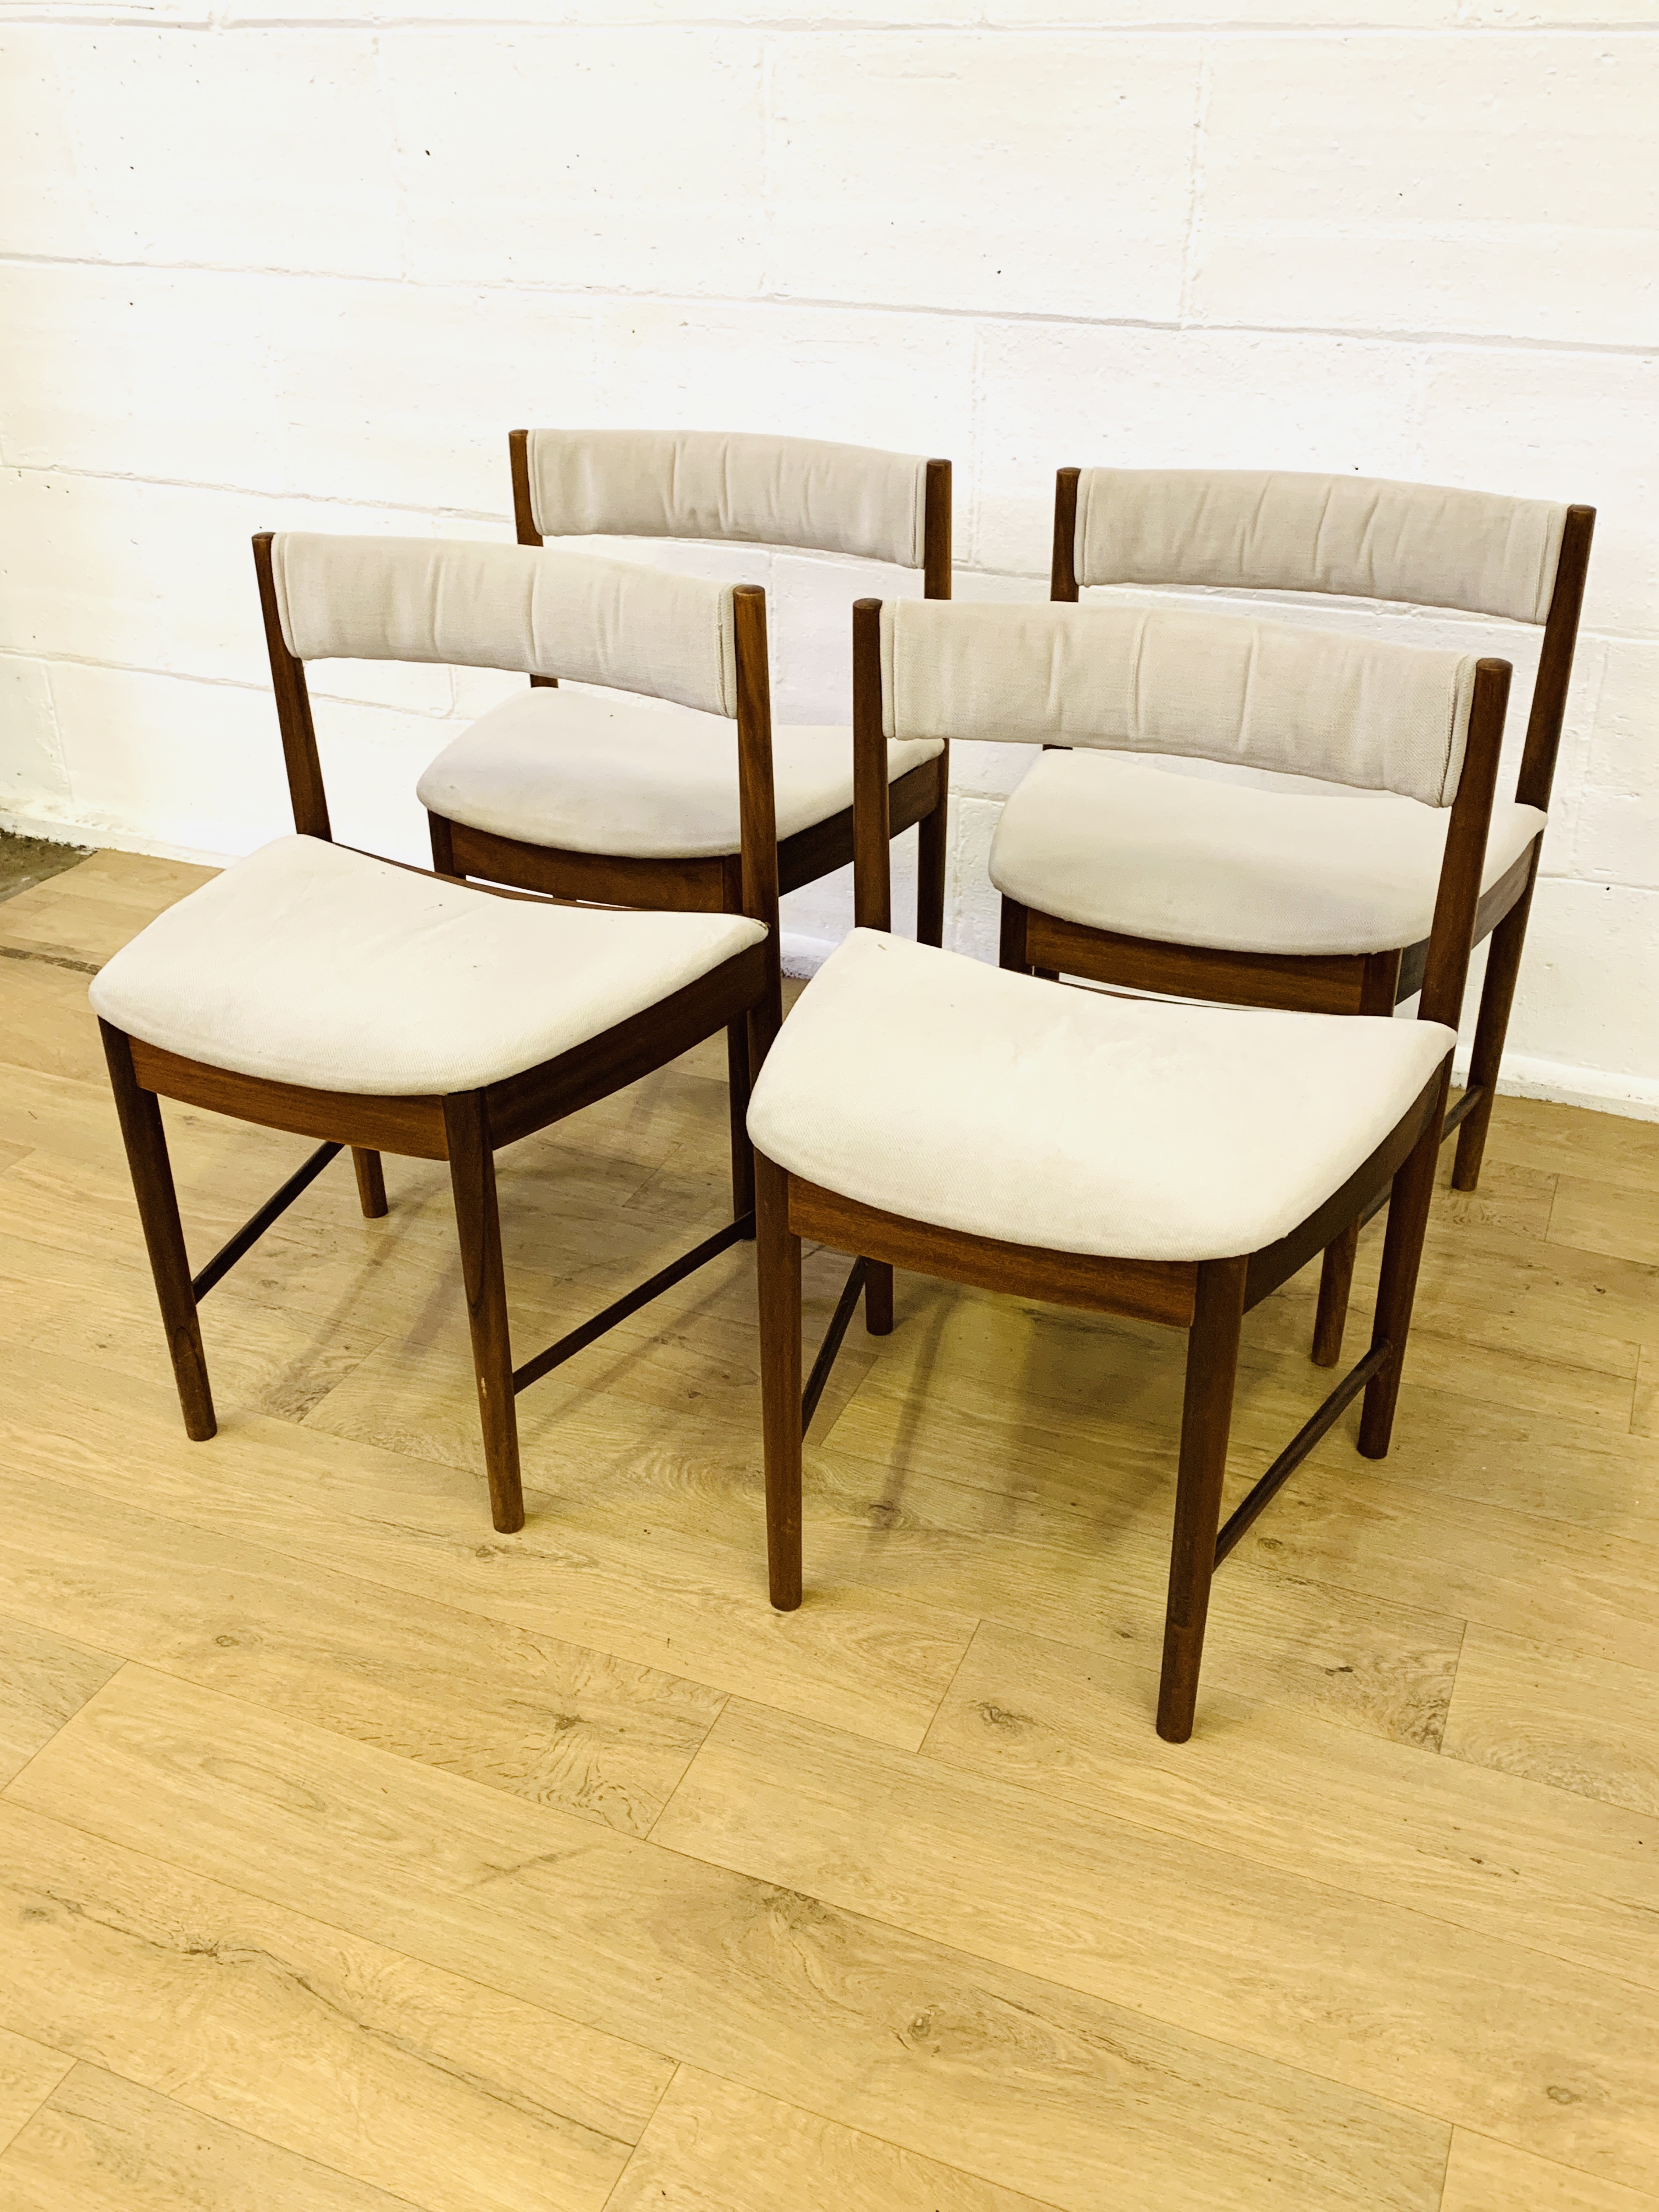 Four teak dining chairs - Image 2 of 4